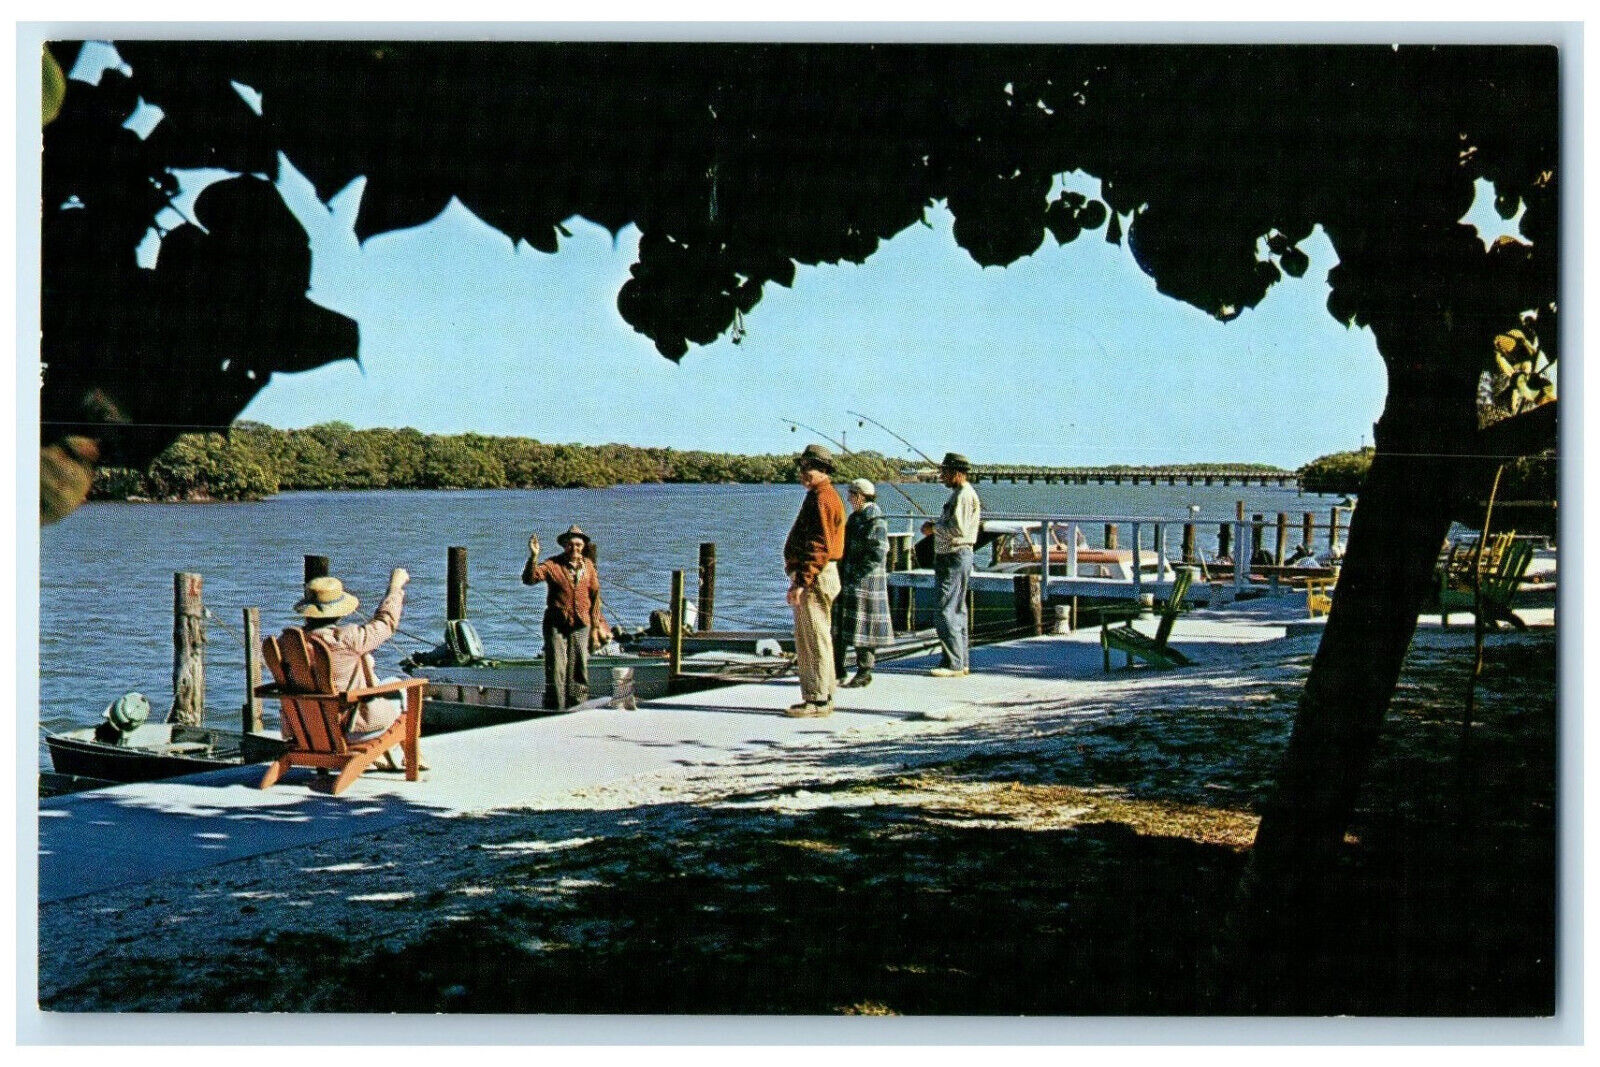 c1950s Swapping Fishing Tales on The Docks, Picturesque Englewood FL Postcard